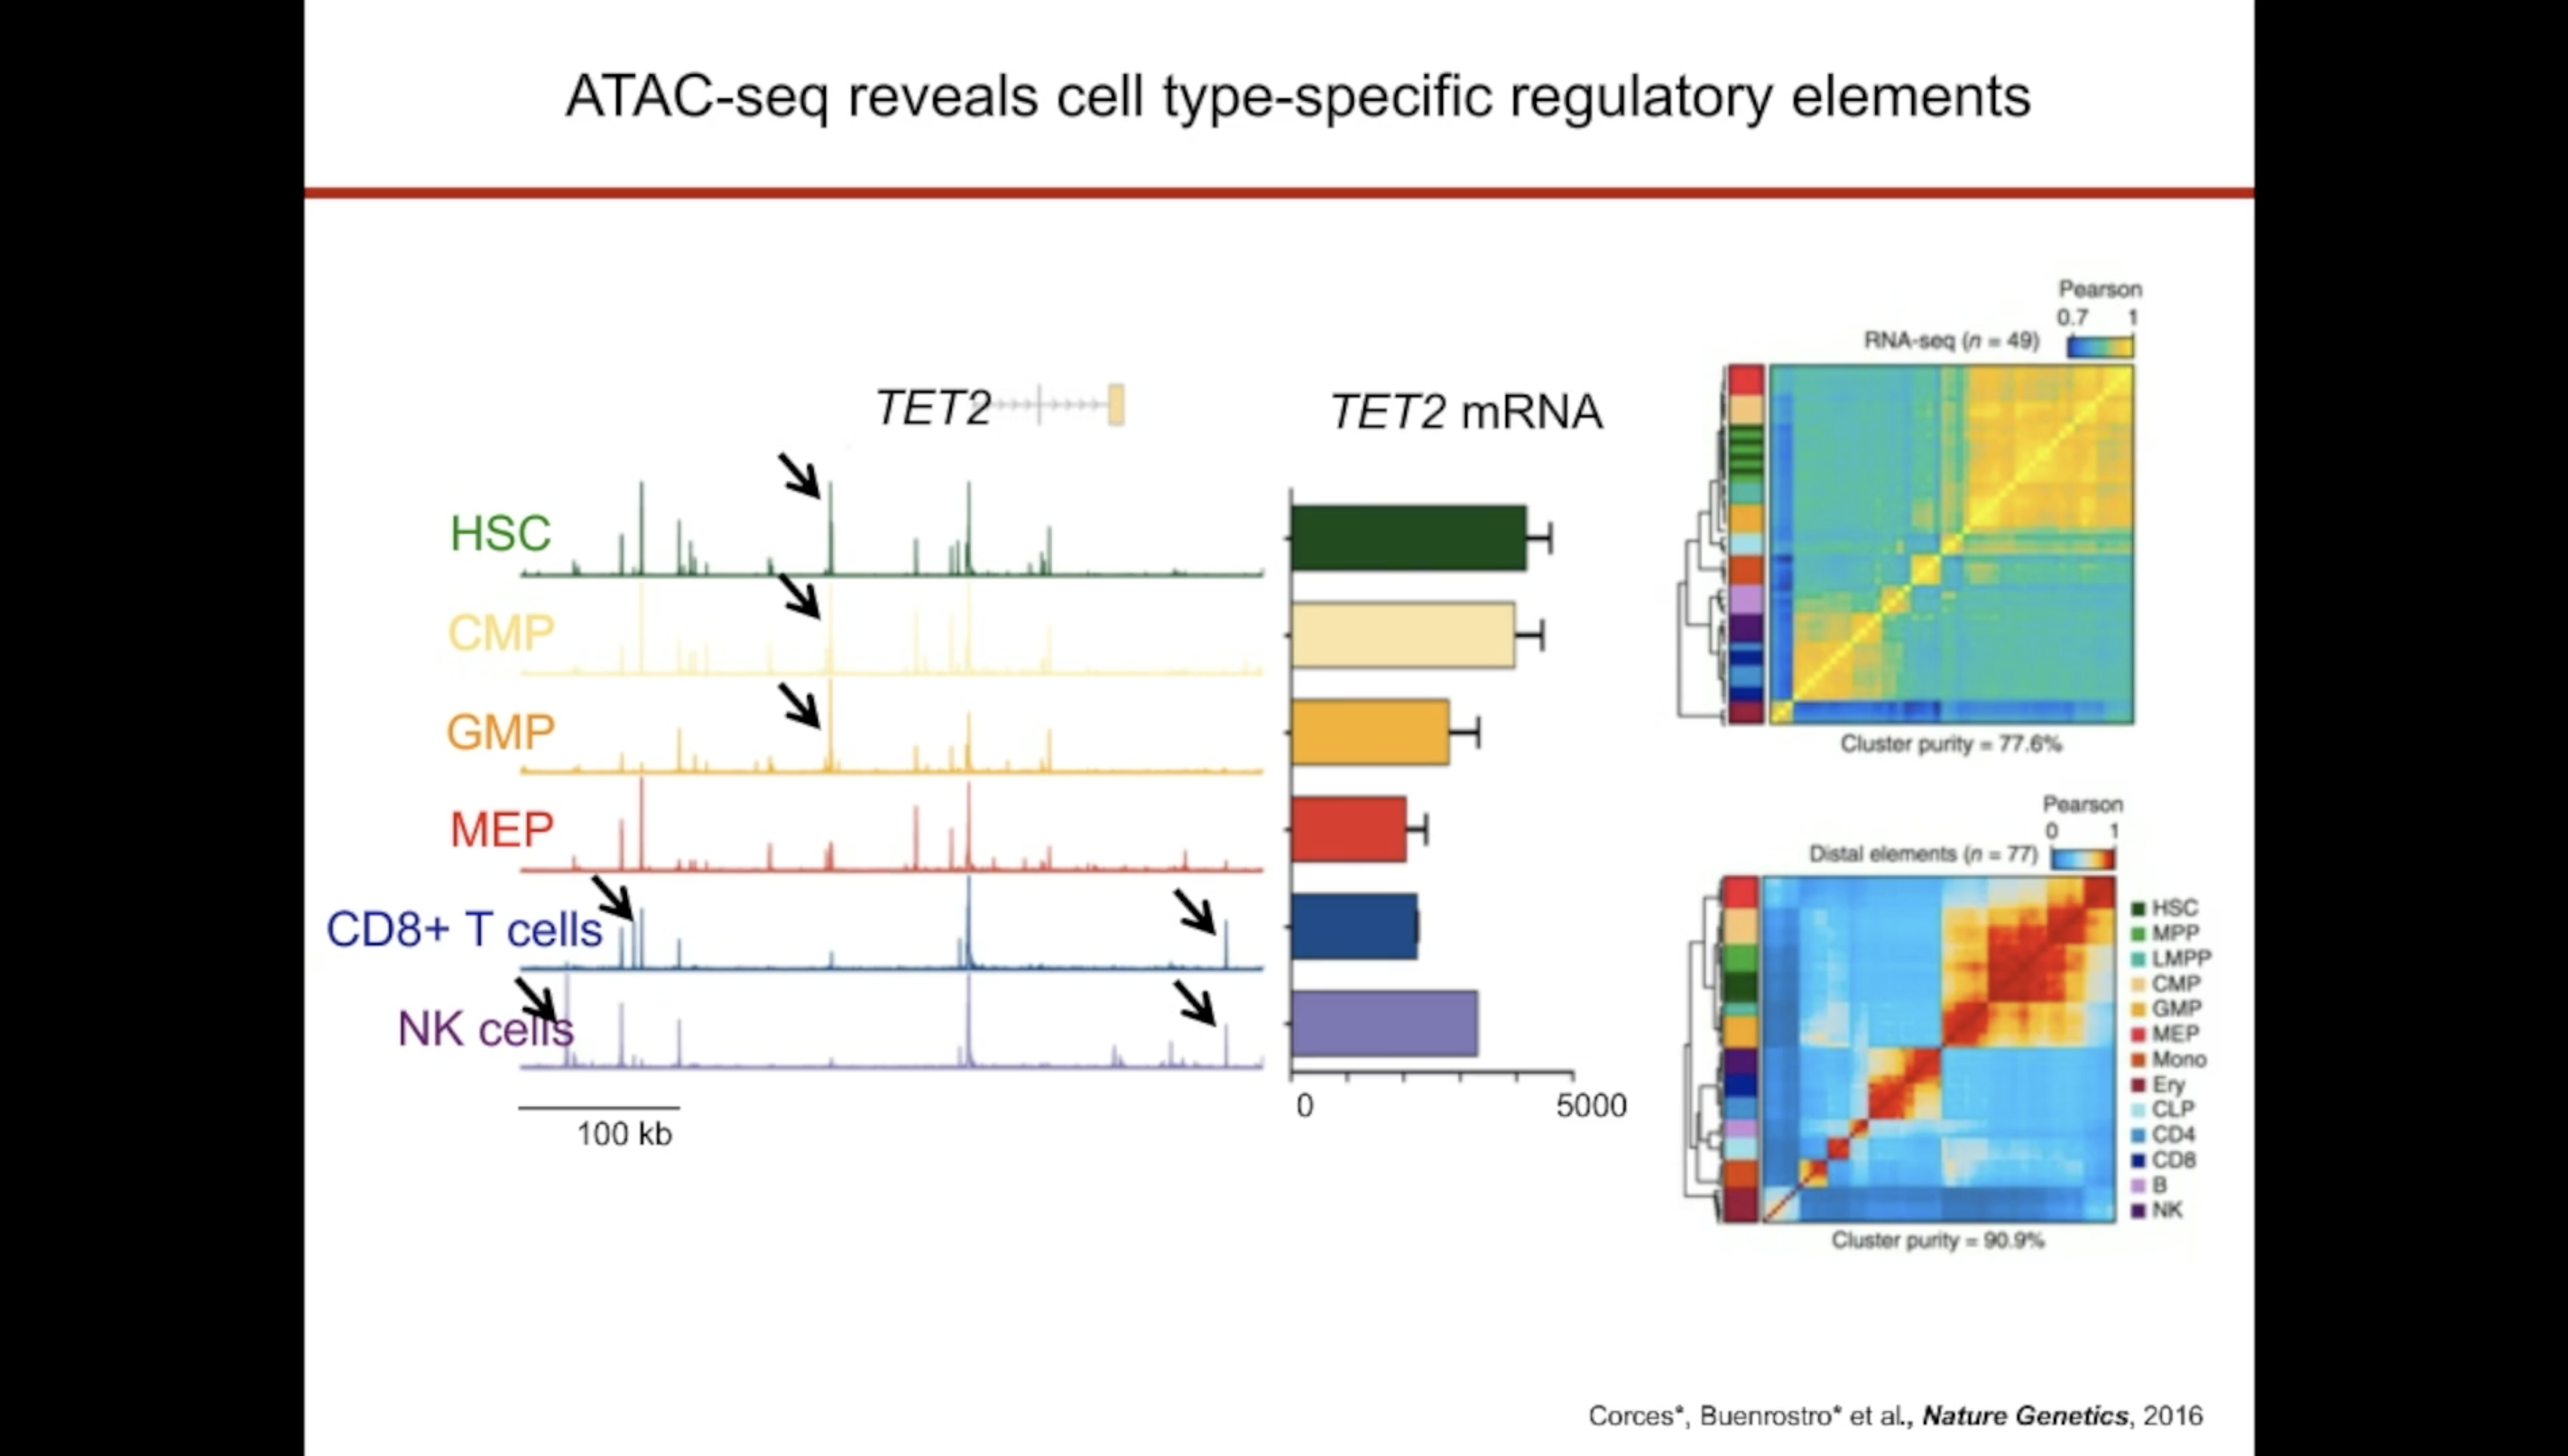 Single cell genomics in checkpoint blockade and CAR-T cell immunotherapy